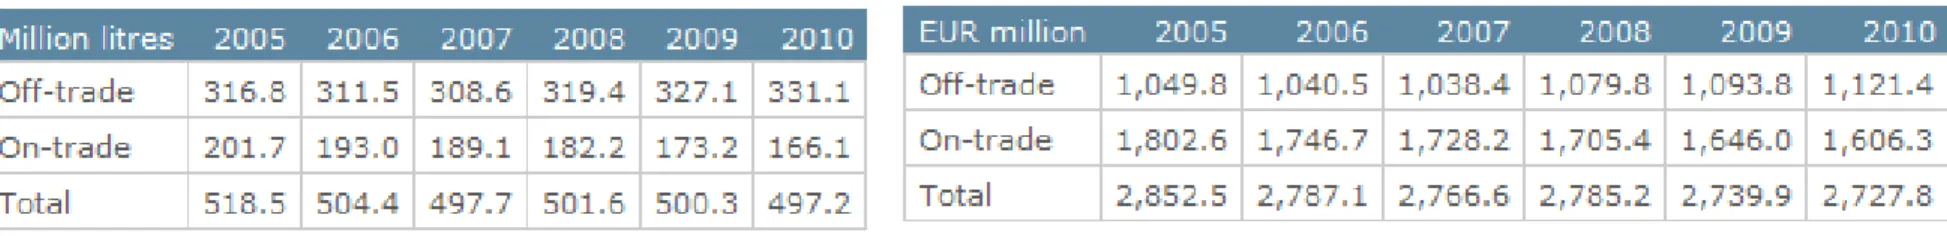 Table 3 - Sales of wine by on trade and off trade between 2005 and 2010: in Million of litles and in Million of Euros 